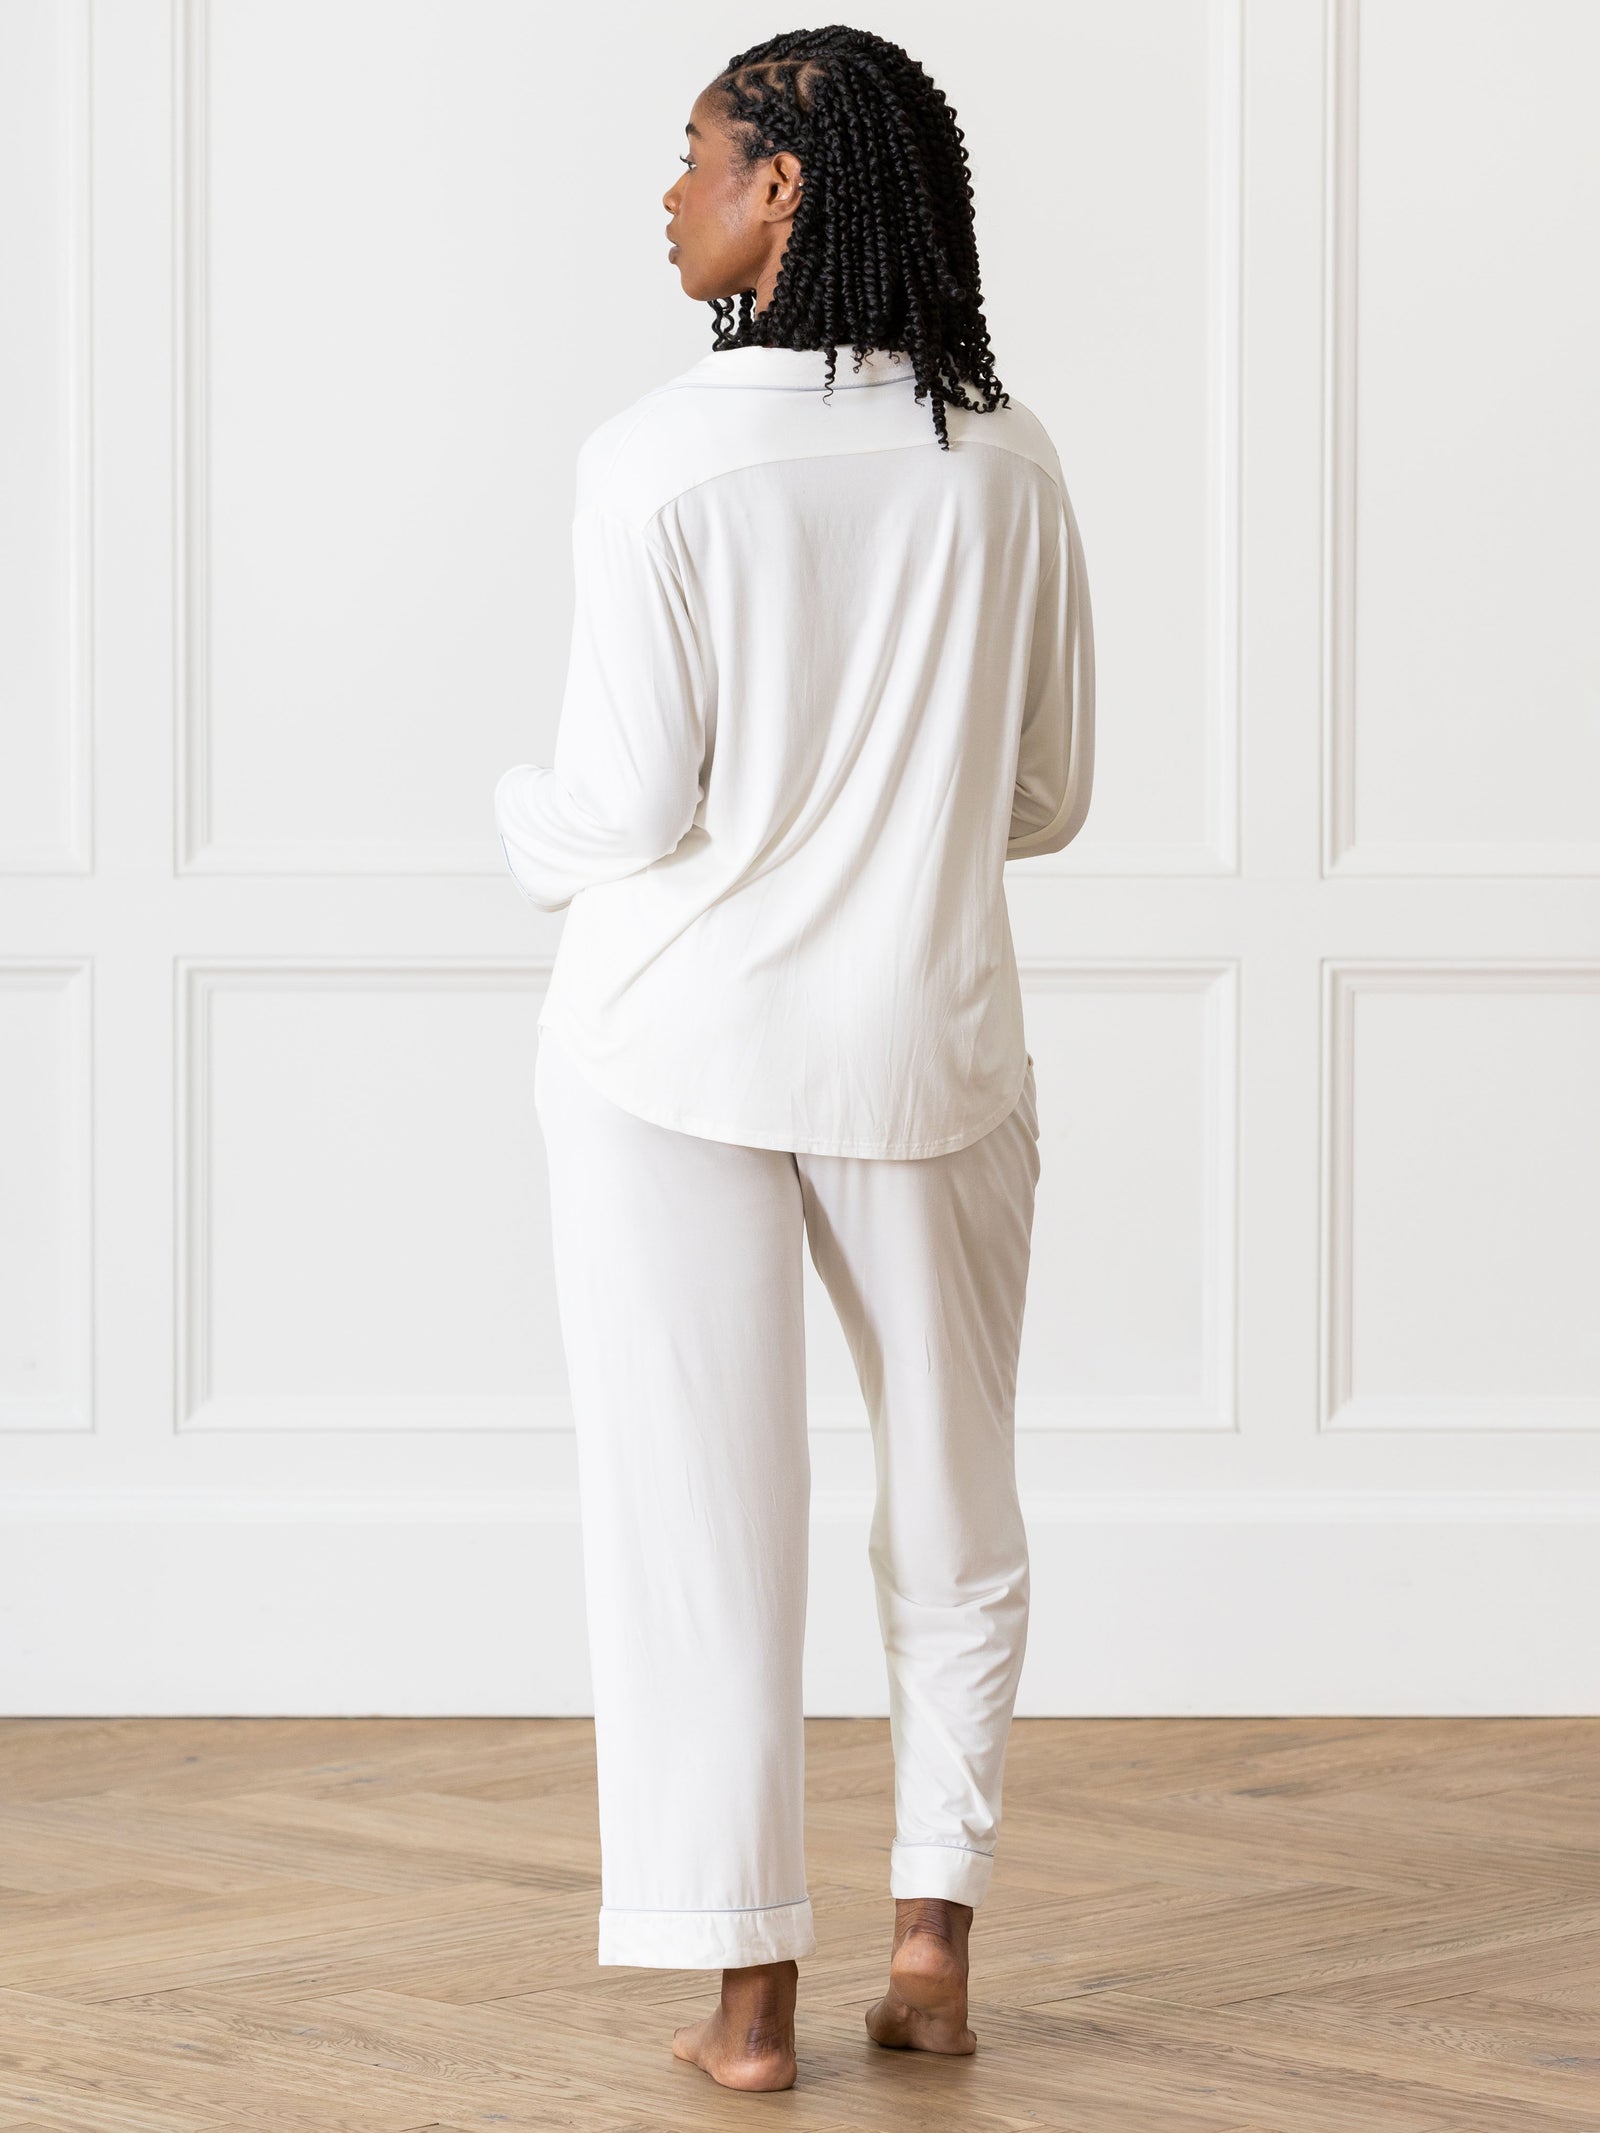 Ivory Long Sleeve Pajama Set modeled by a woman. The photo was taken in a high contrast setting, showing off the colors and lines of the pajamas. 